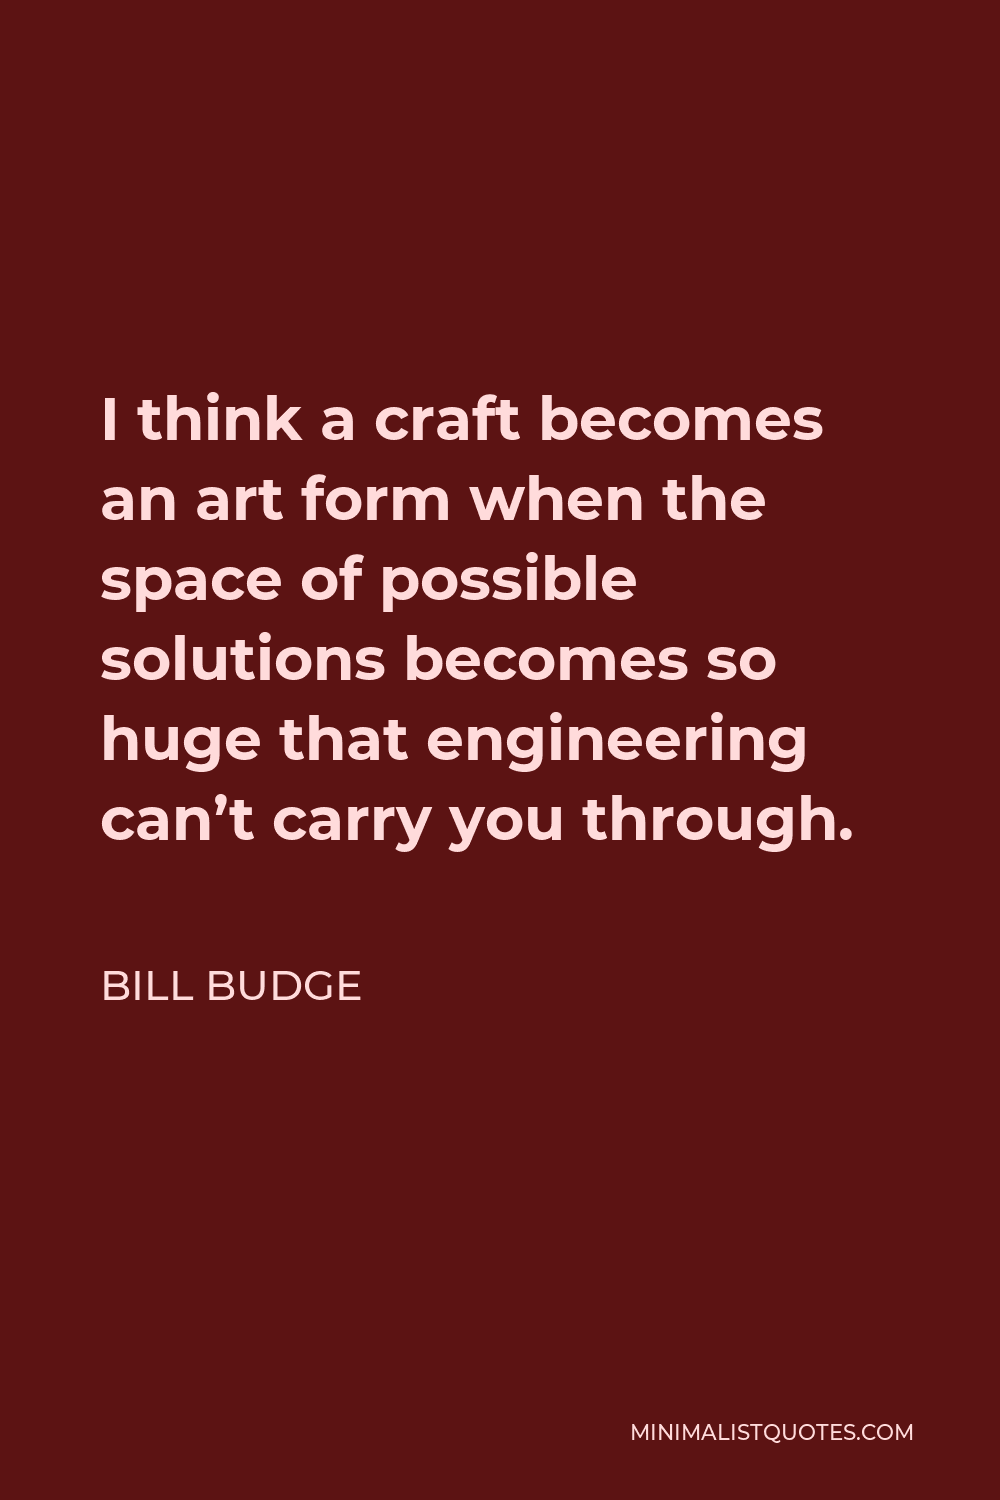 Bill Budge Quote - I think a craft becomes an art form when the space of possible solutions becomes so huge that engineering can’t carry you through.